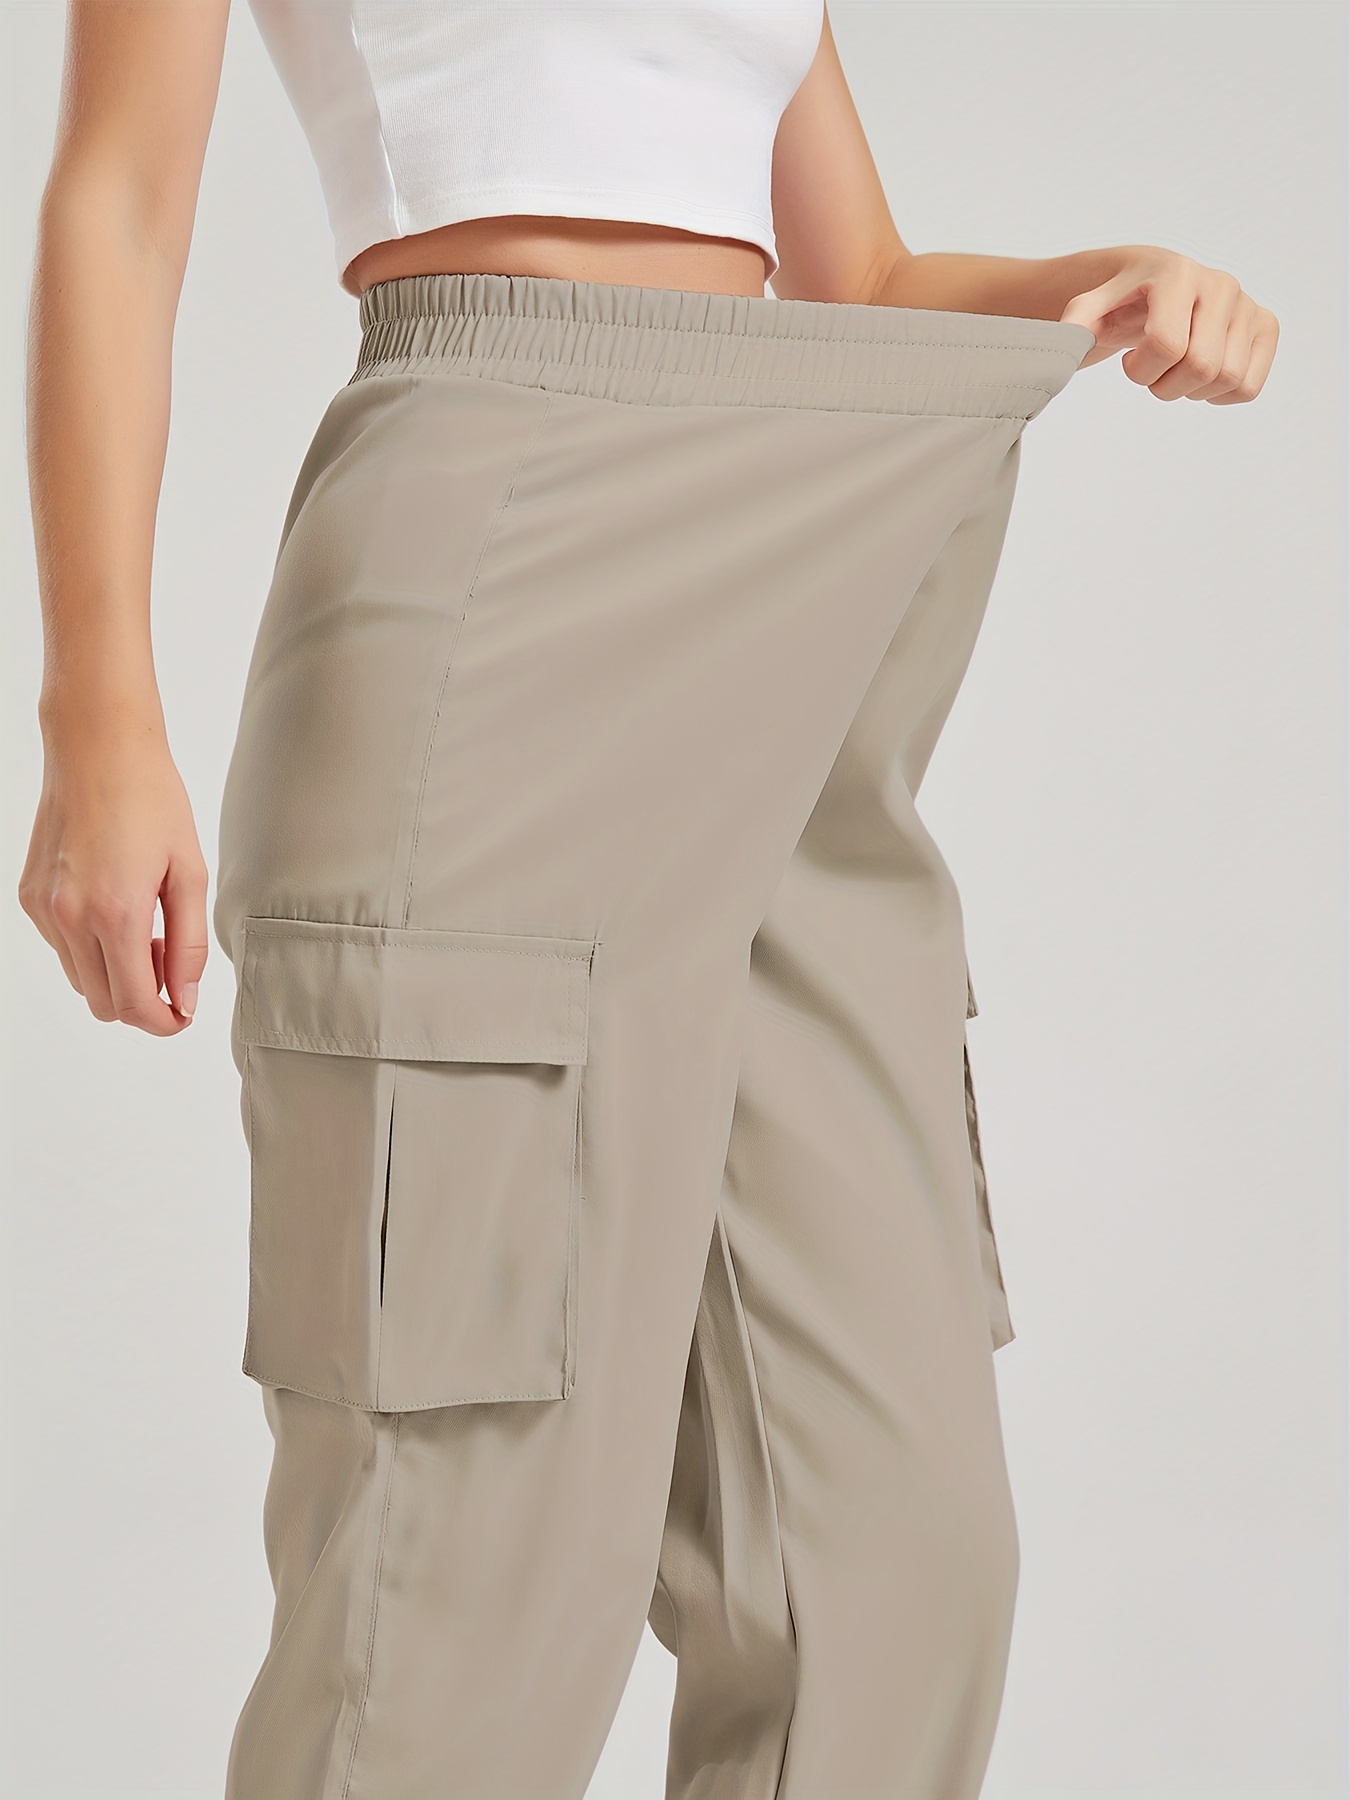 solid jogger cargo pants 2 pack casual flap pocket elastic waist pants womens clothing details 11